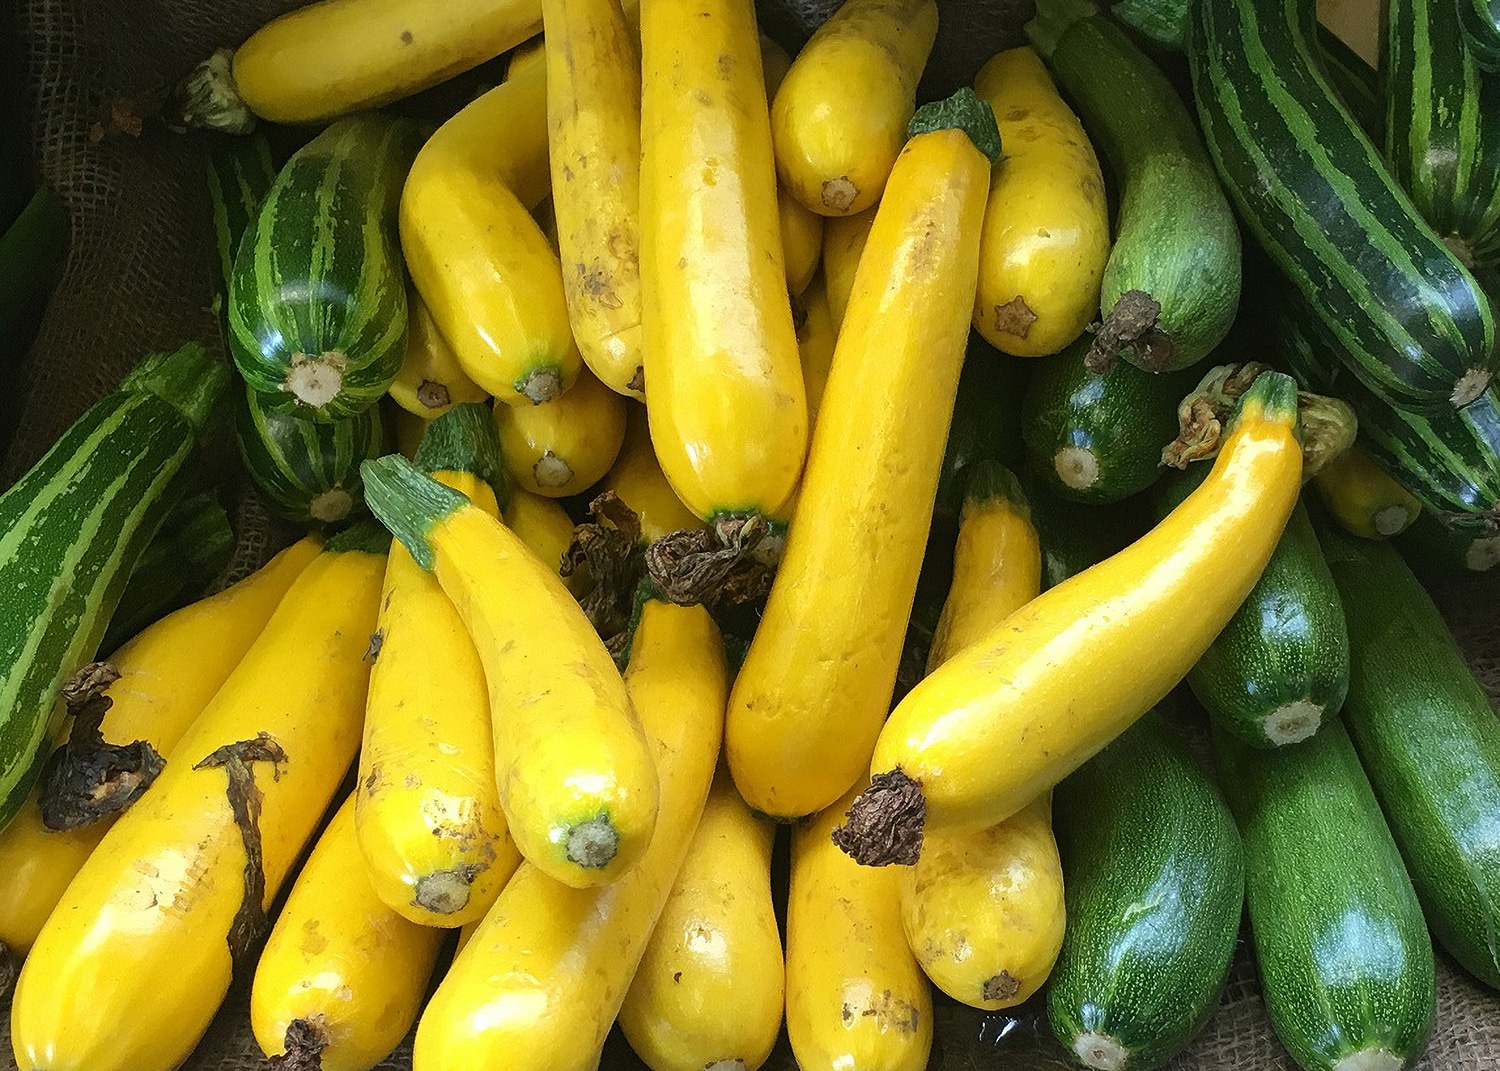 A pile of courgettes at Borough Market